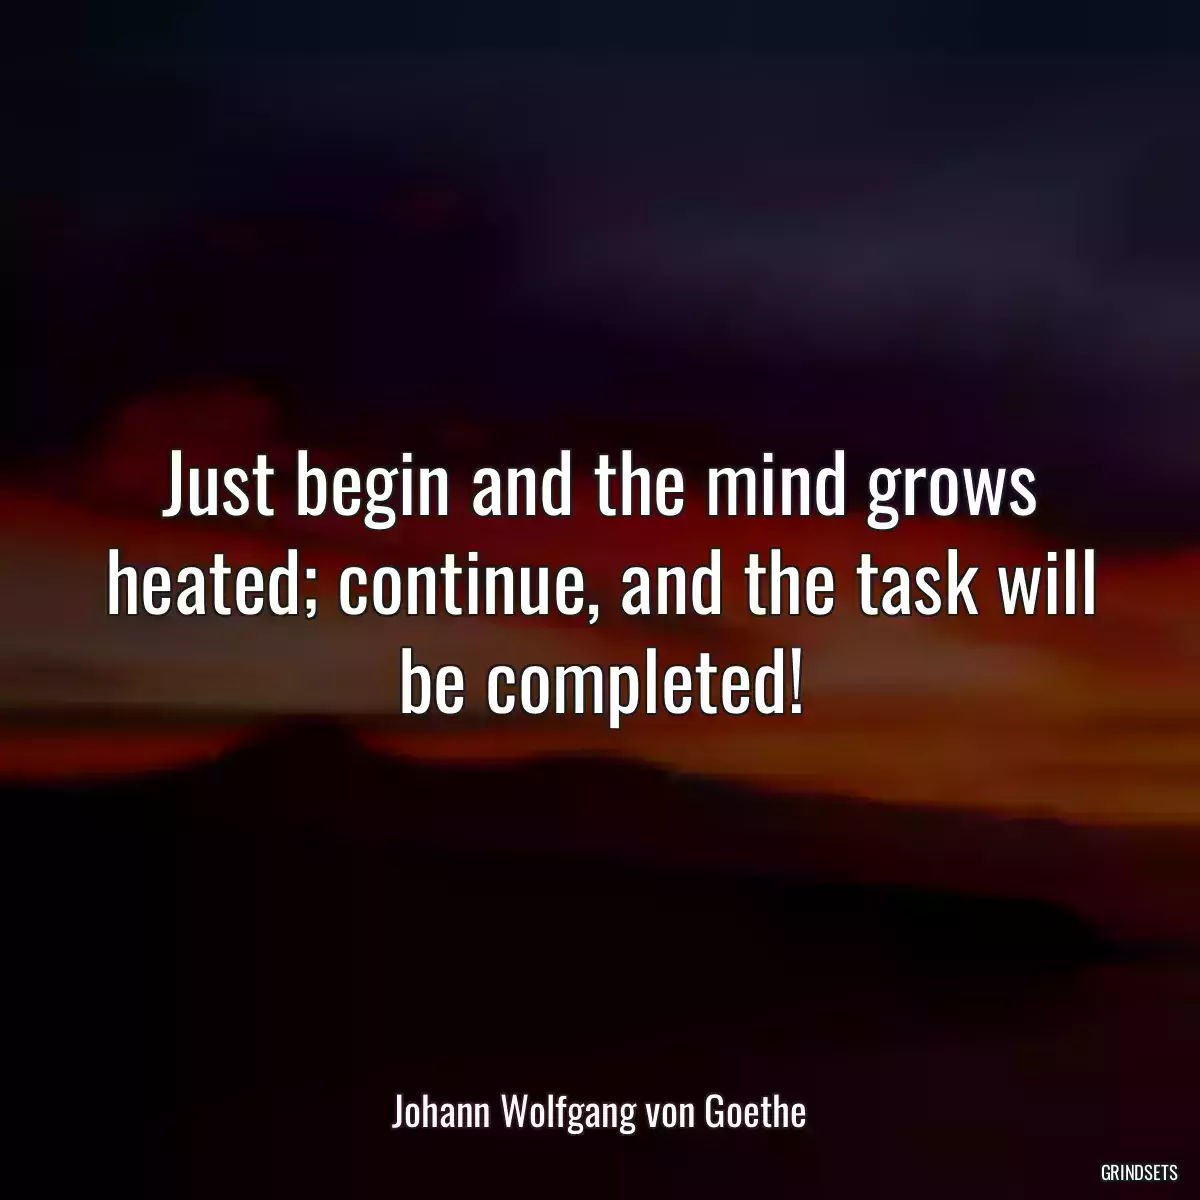 Just begin and the mind grows heated; continue, and the task will be completed!